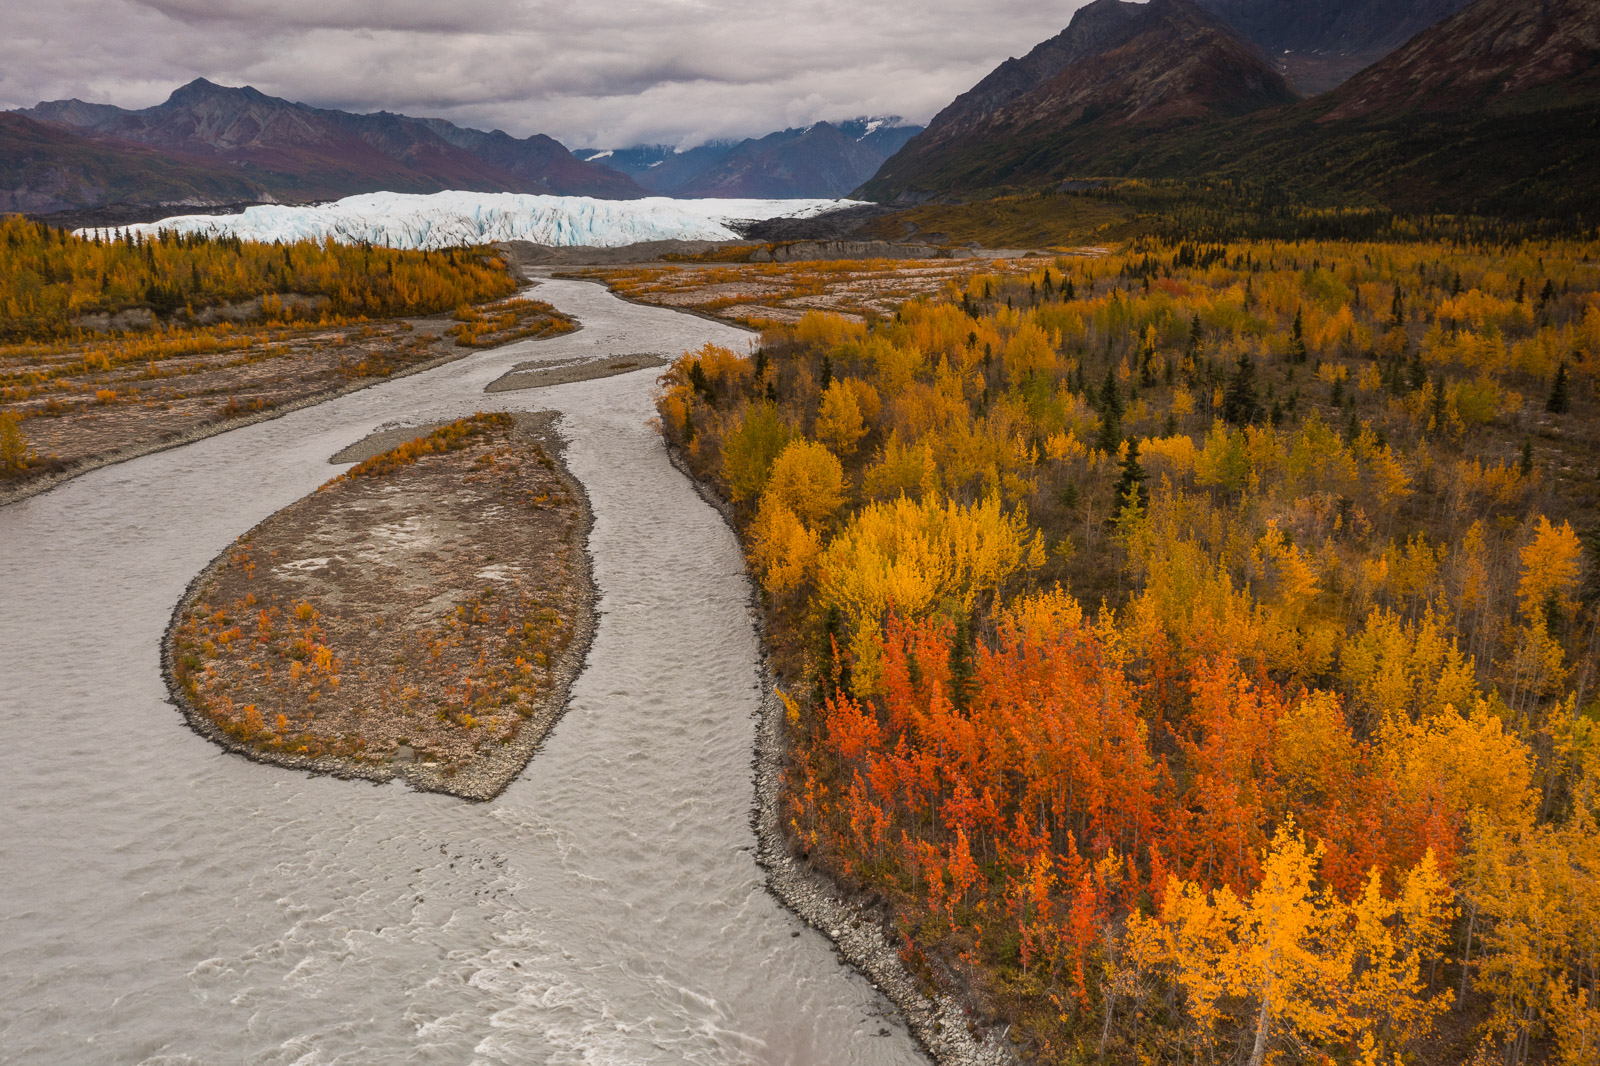 An unusual patch of red colors in a grove of aspens adds a pop of color to the autumn along the Matanuska River downstream of...